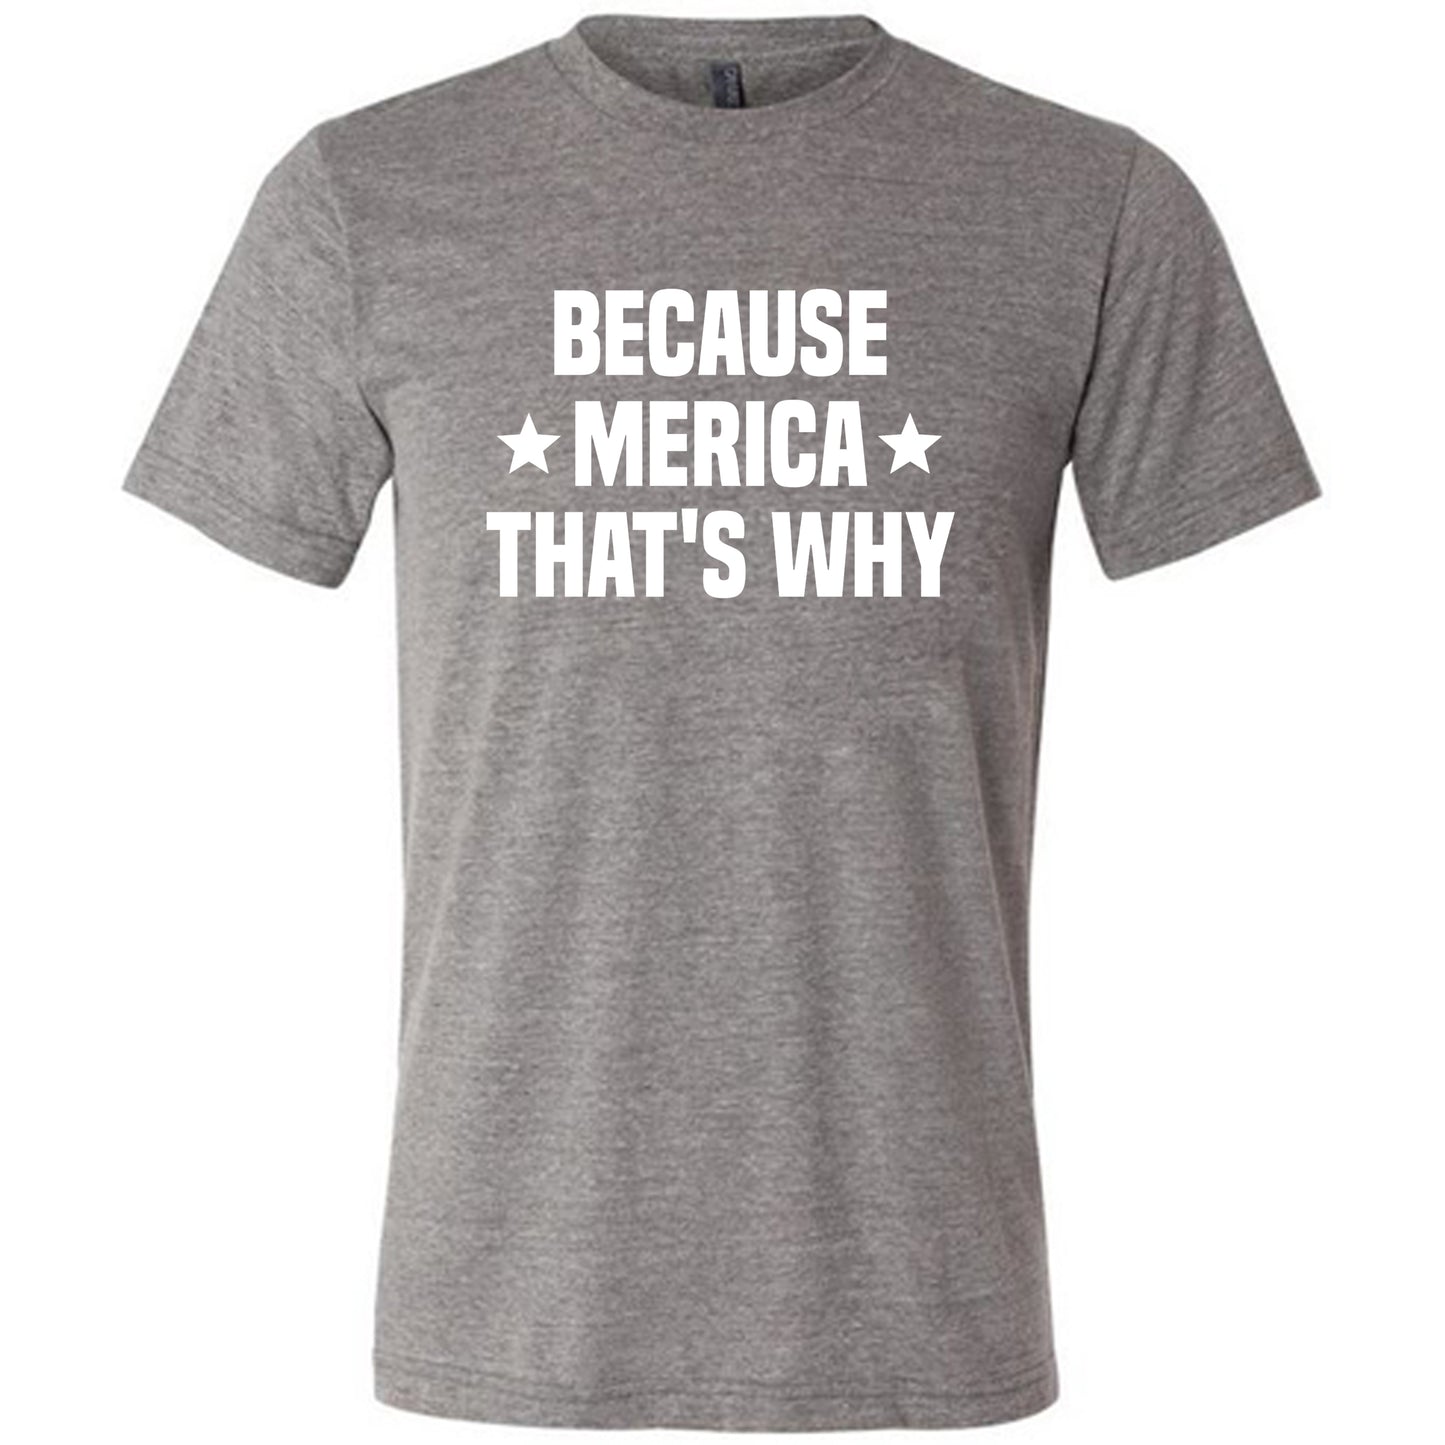 Because Merica That's Why Shirt Unisex